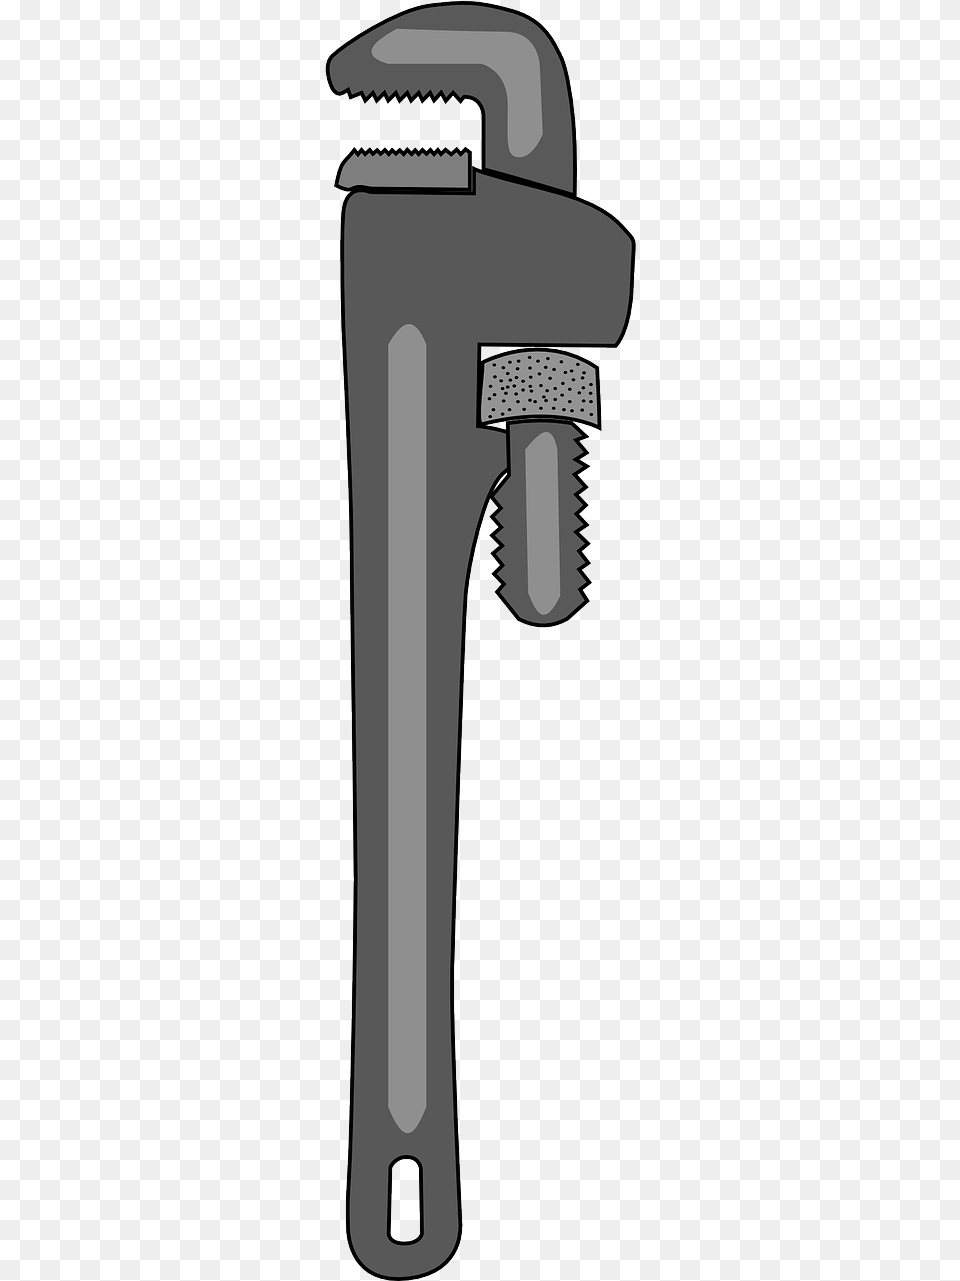 Wrench, Sink, Sink Faucet Png Image